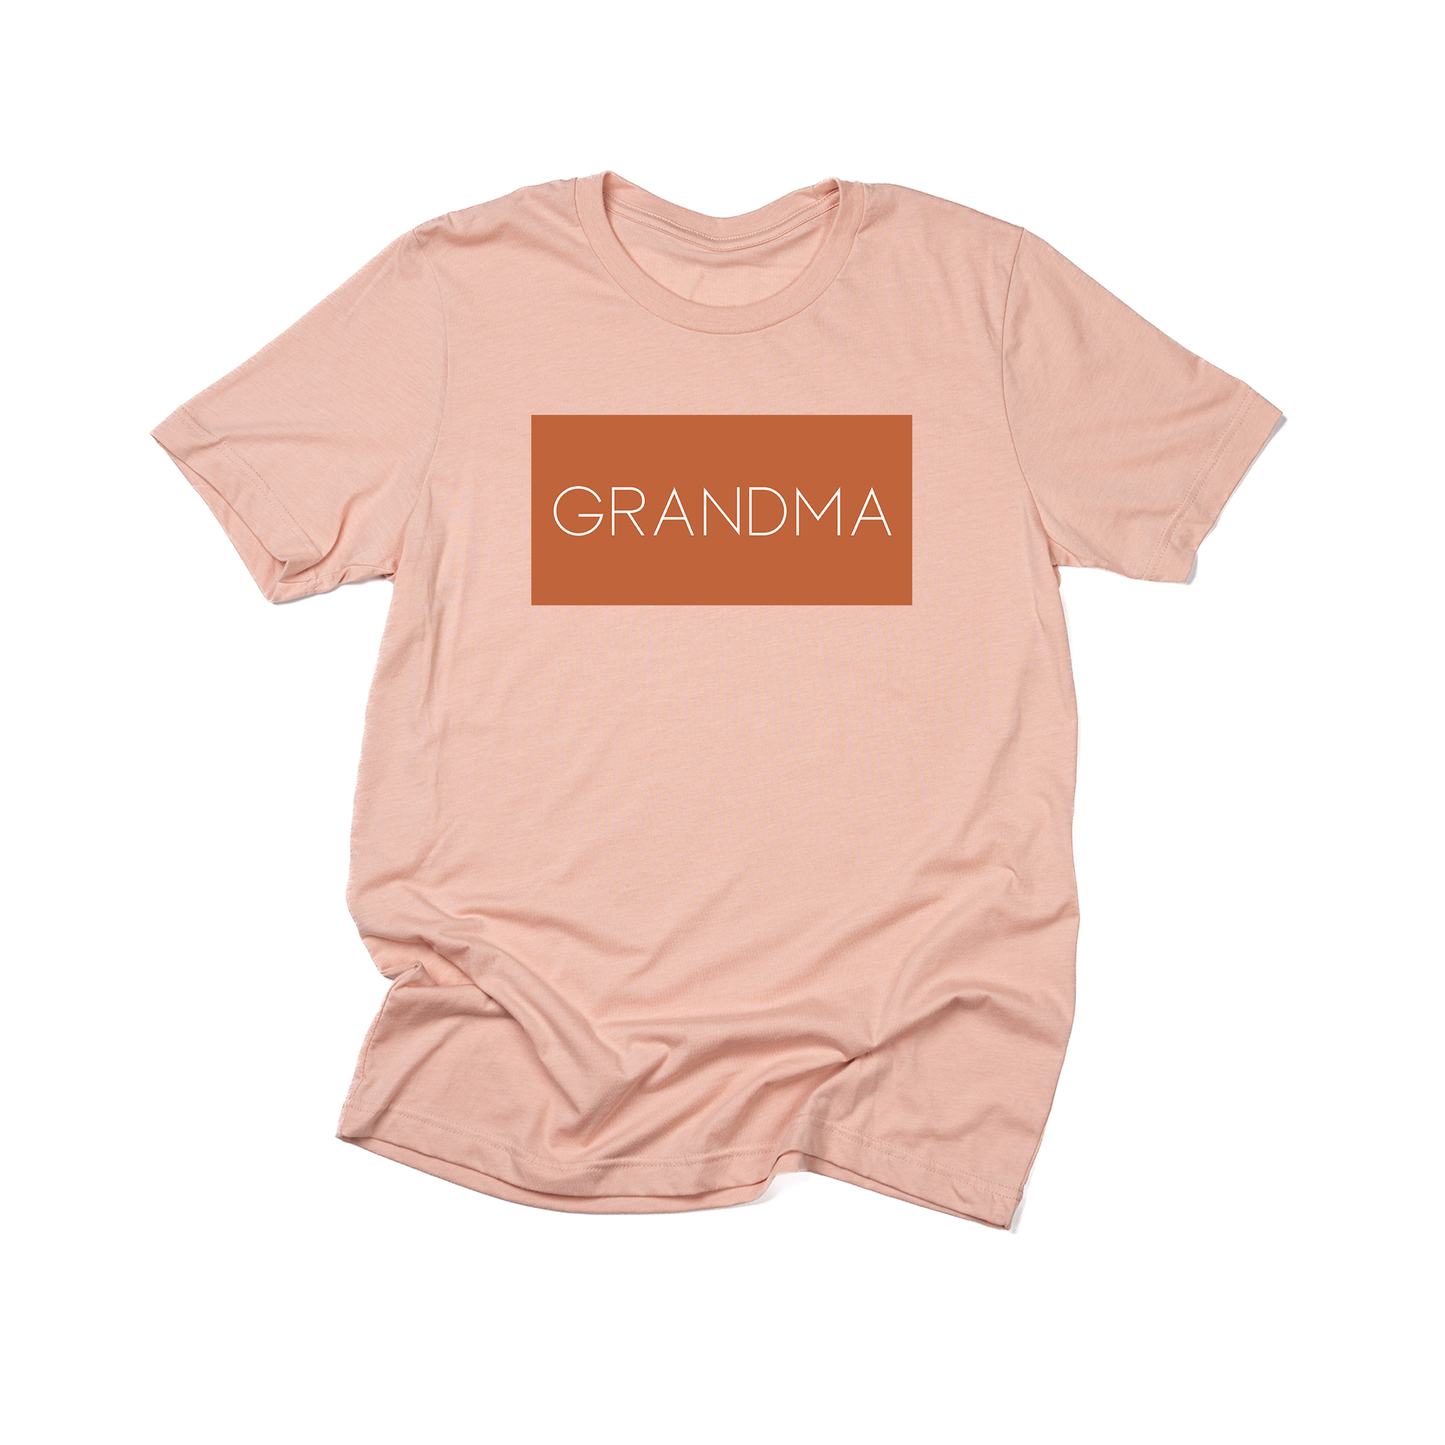 Grandma (Boxed Collection, Rust Box/White Text, Across Front) - Tee (Peach)